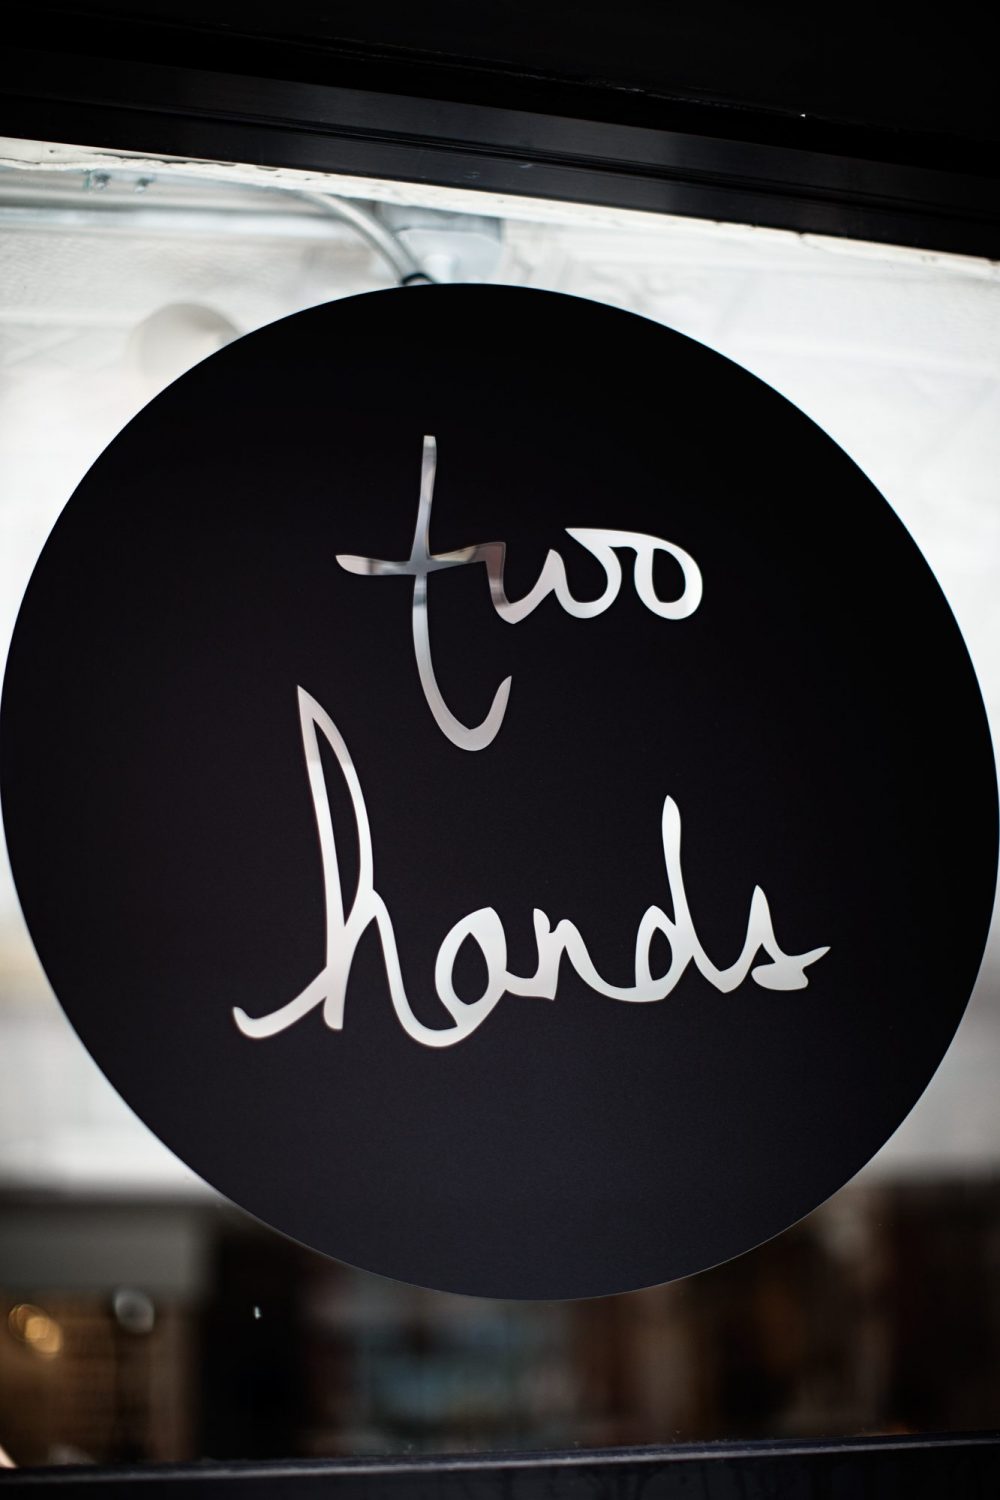 Downtown Recommends: Two Hands